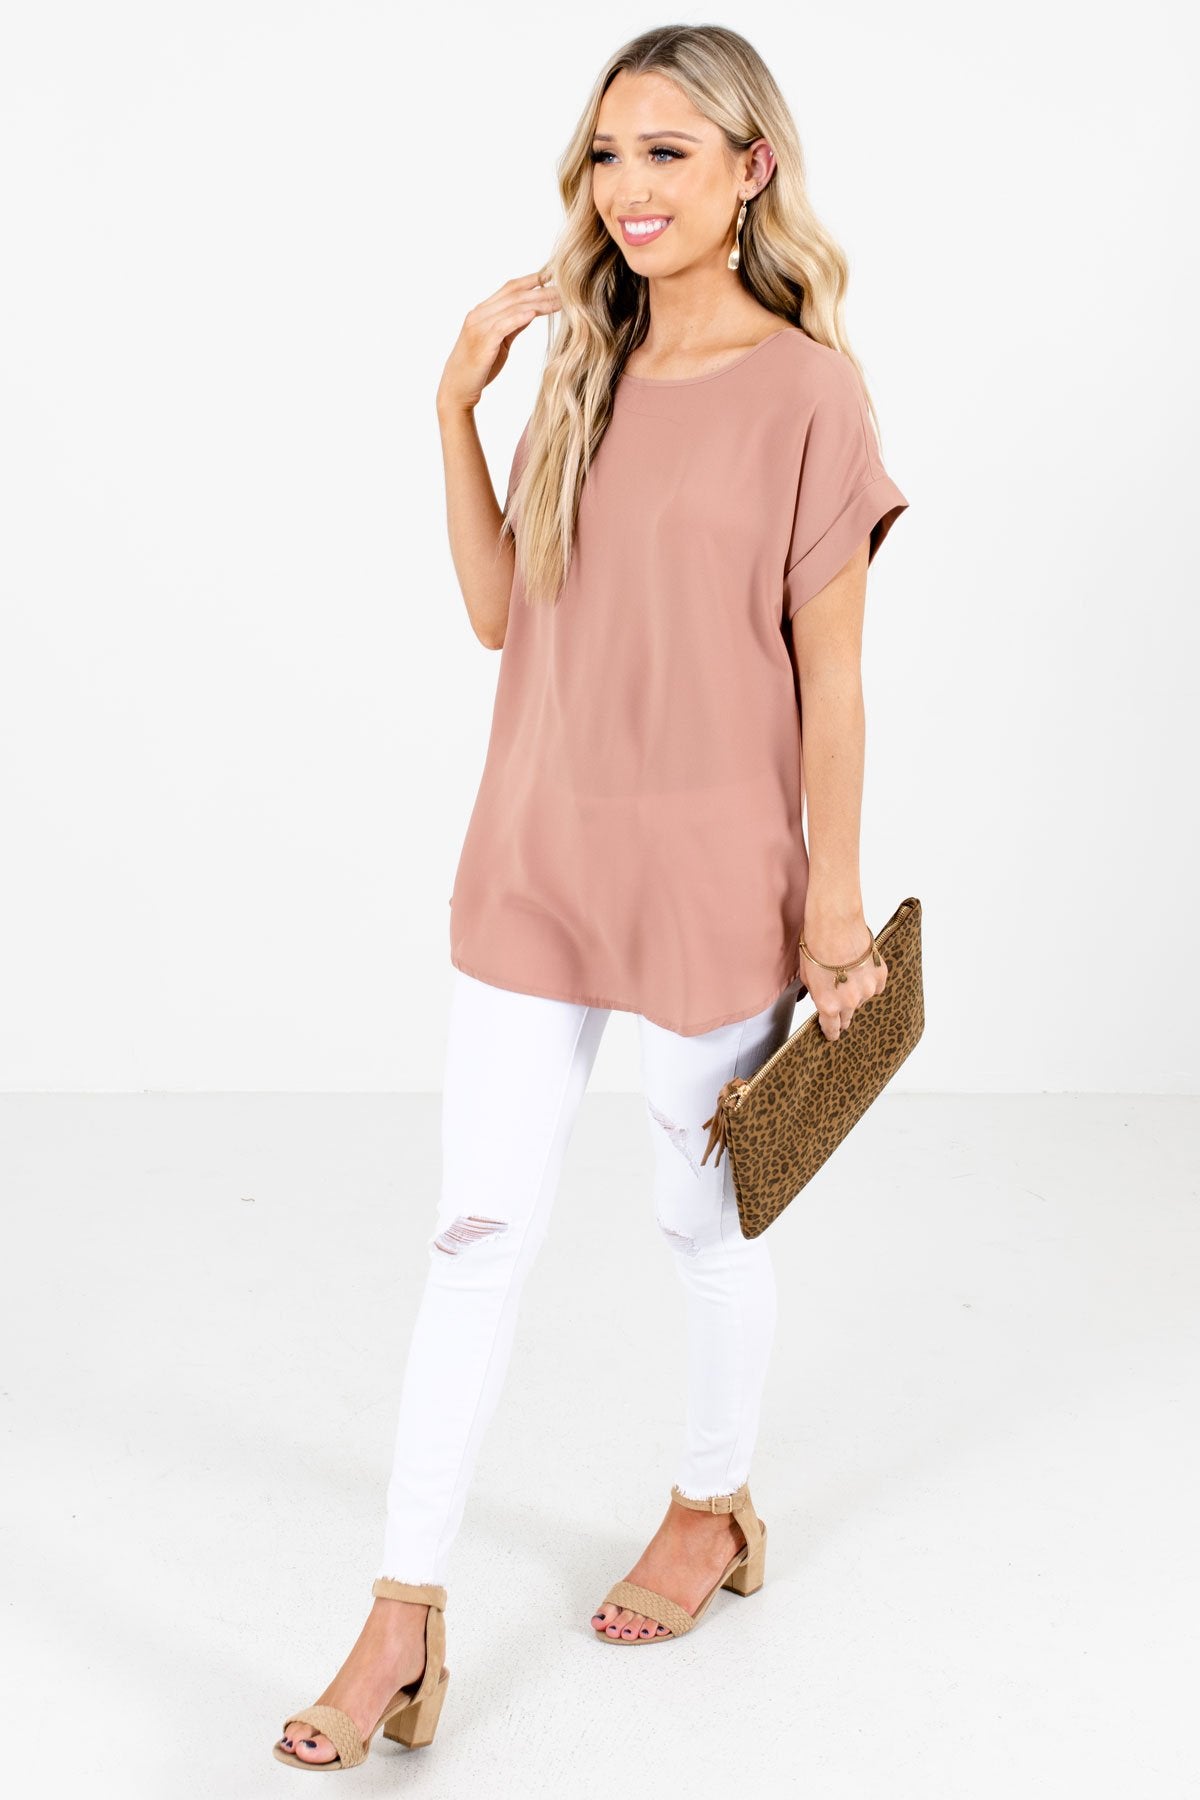 Tan Brown Cute and Comfortable Boutique Blouses for Women